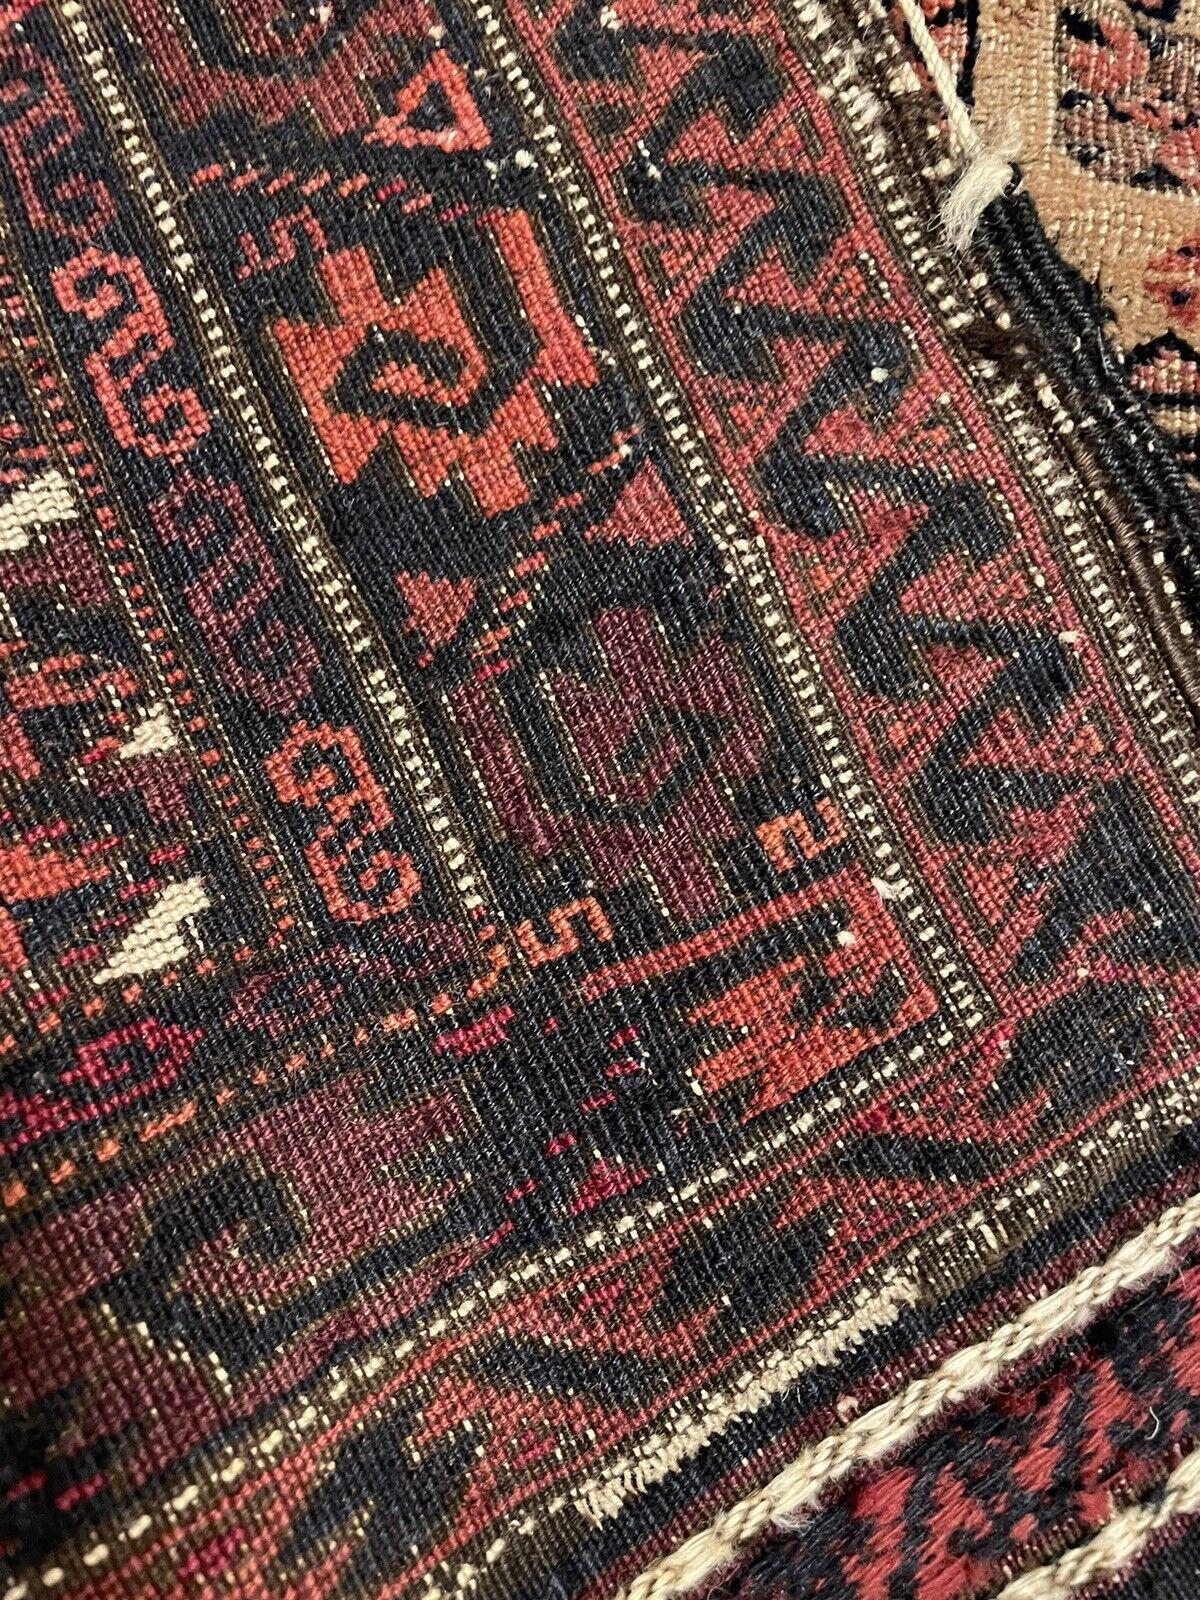 Handmade Antique Afghan Baluch Collectible Rug 2.5' x 4.6', 1880s - 1N18 For Sale 11